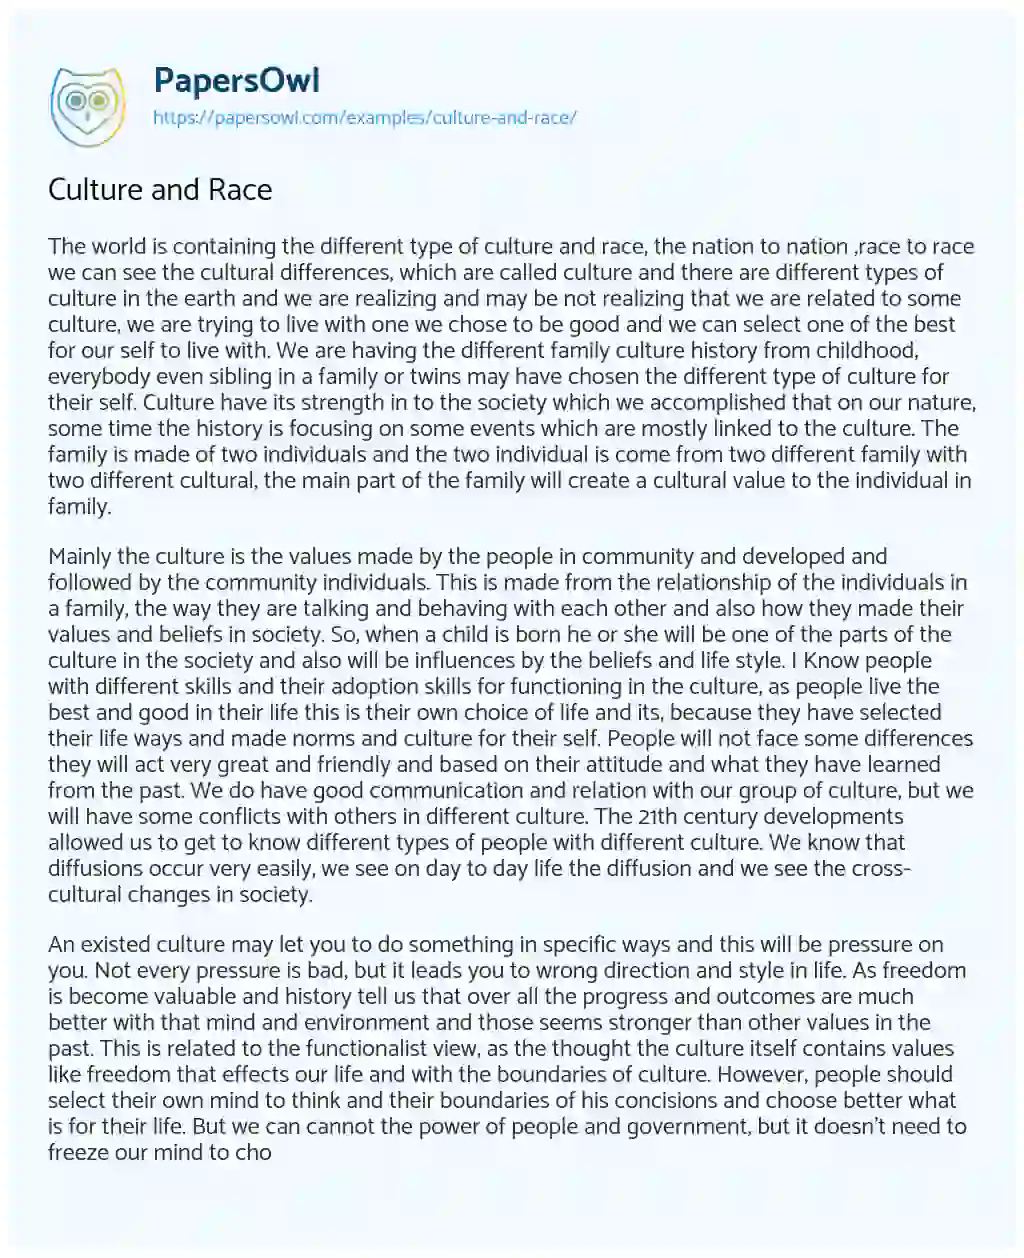 Essay on Culture and Race